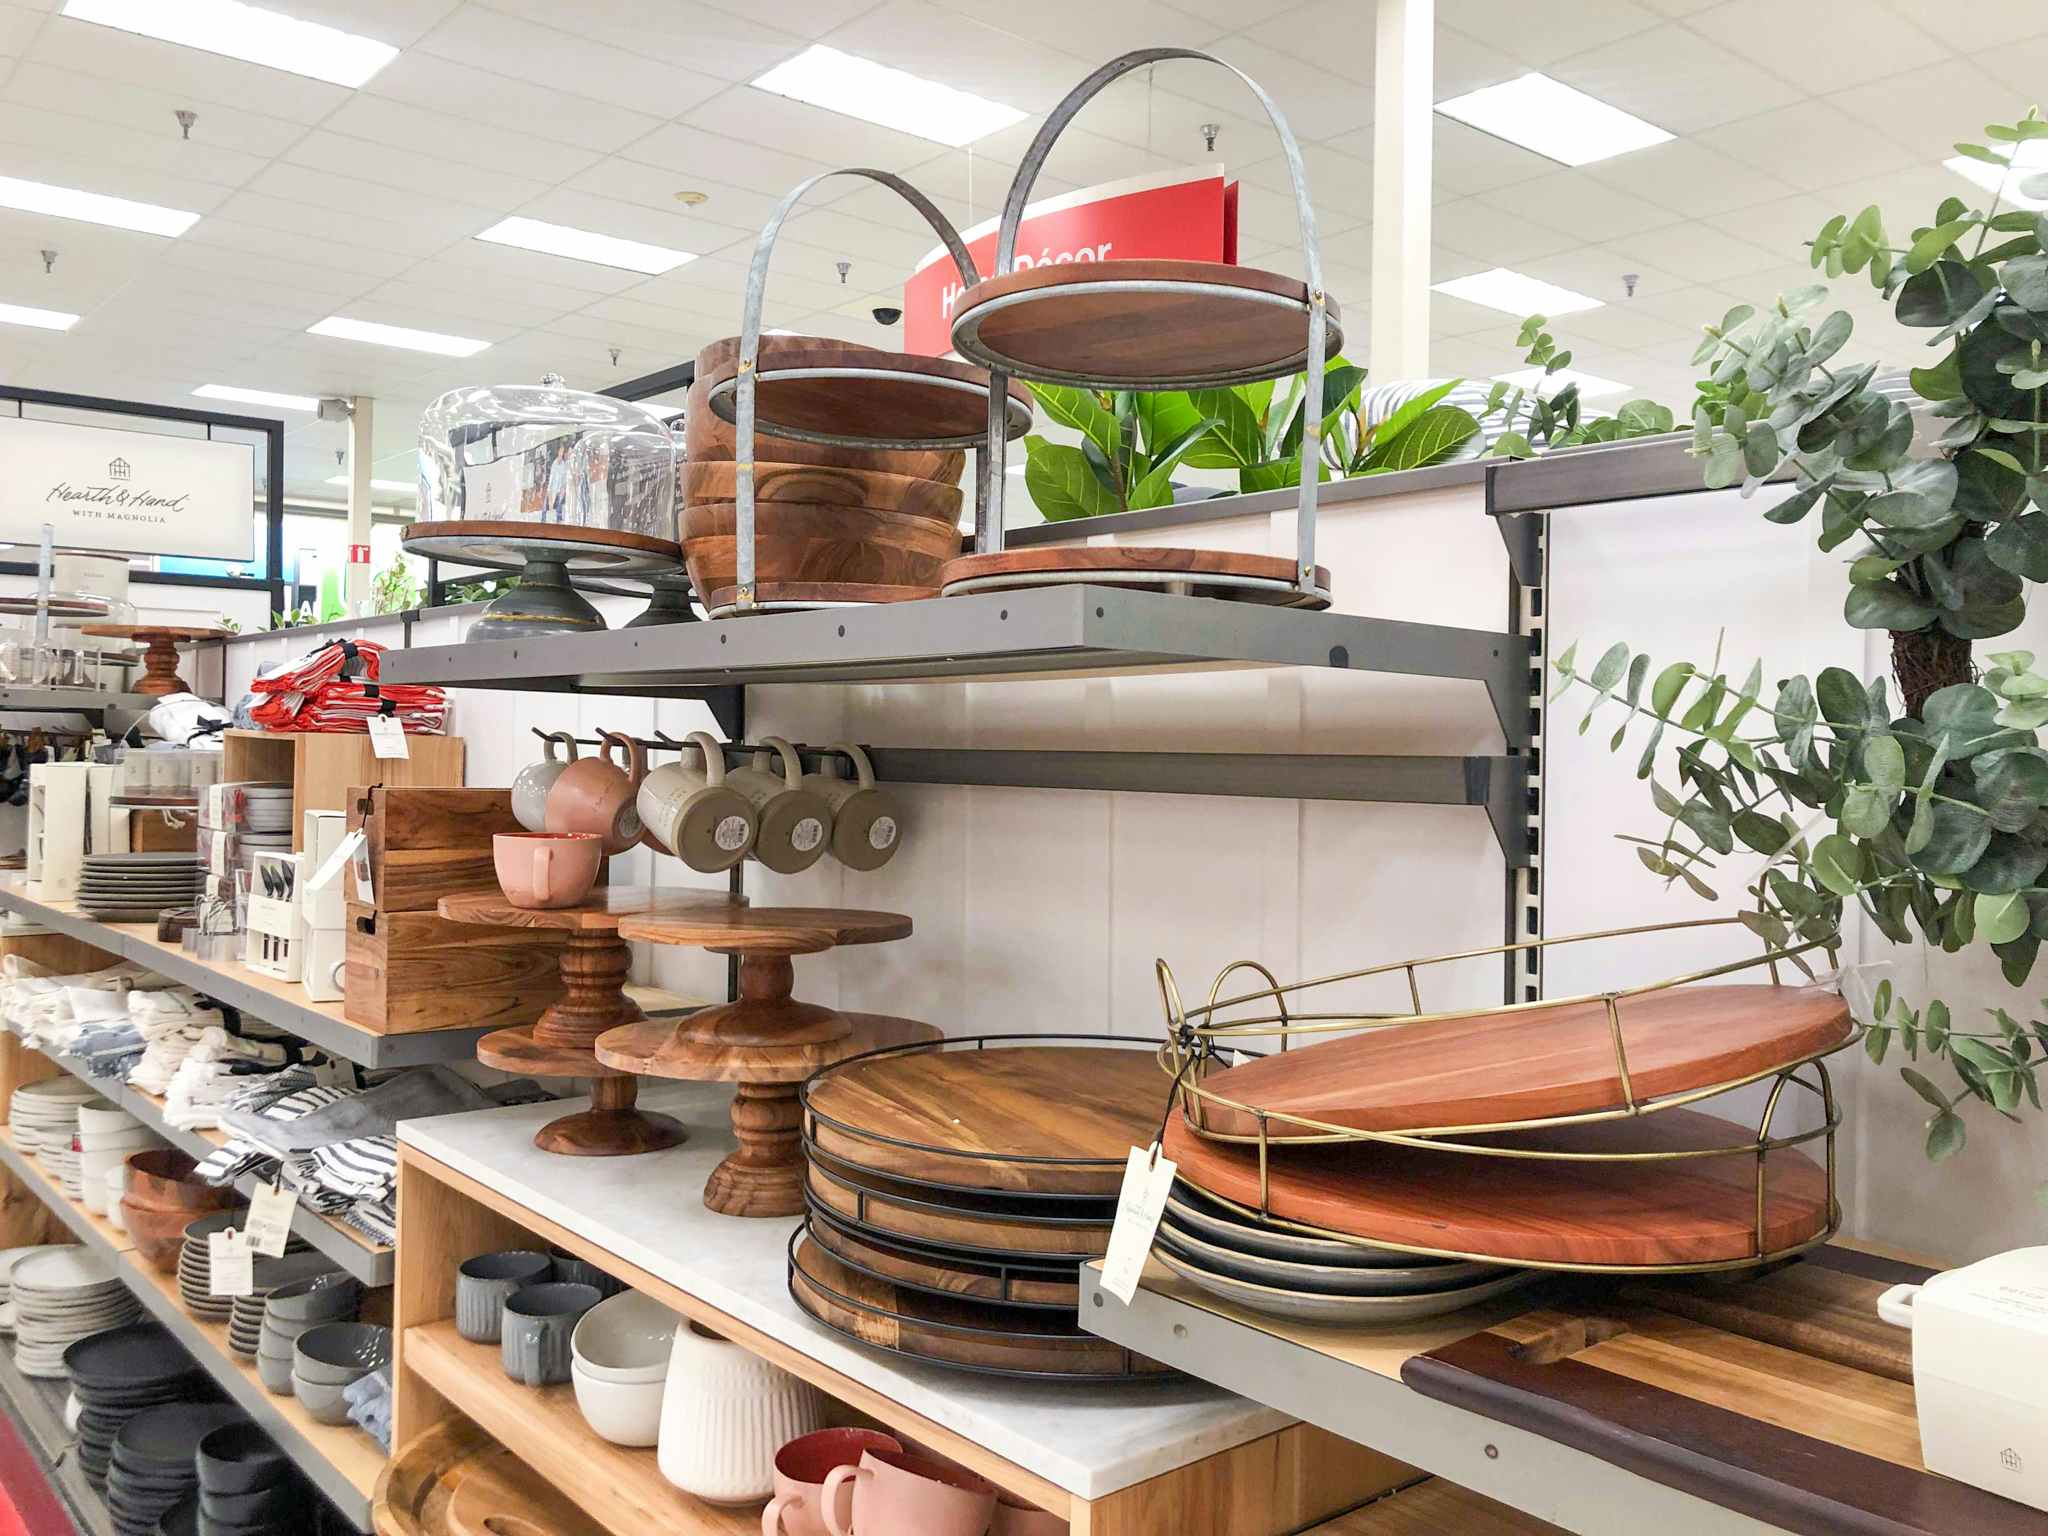 Display of kitchen items, including Lazy Susan's and tiered trays at target